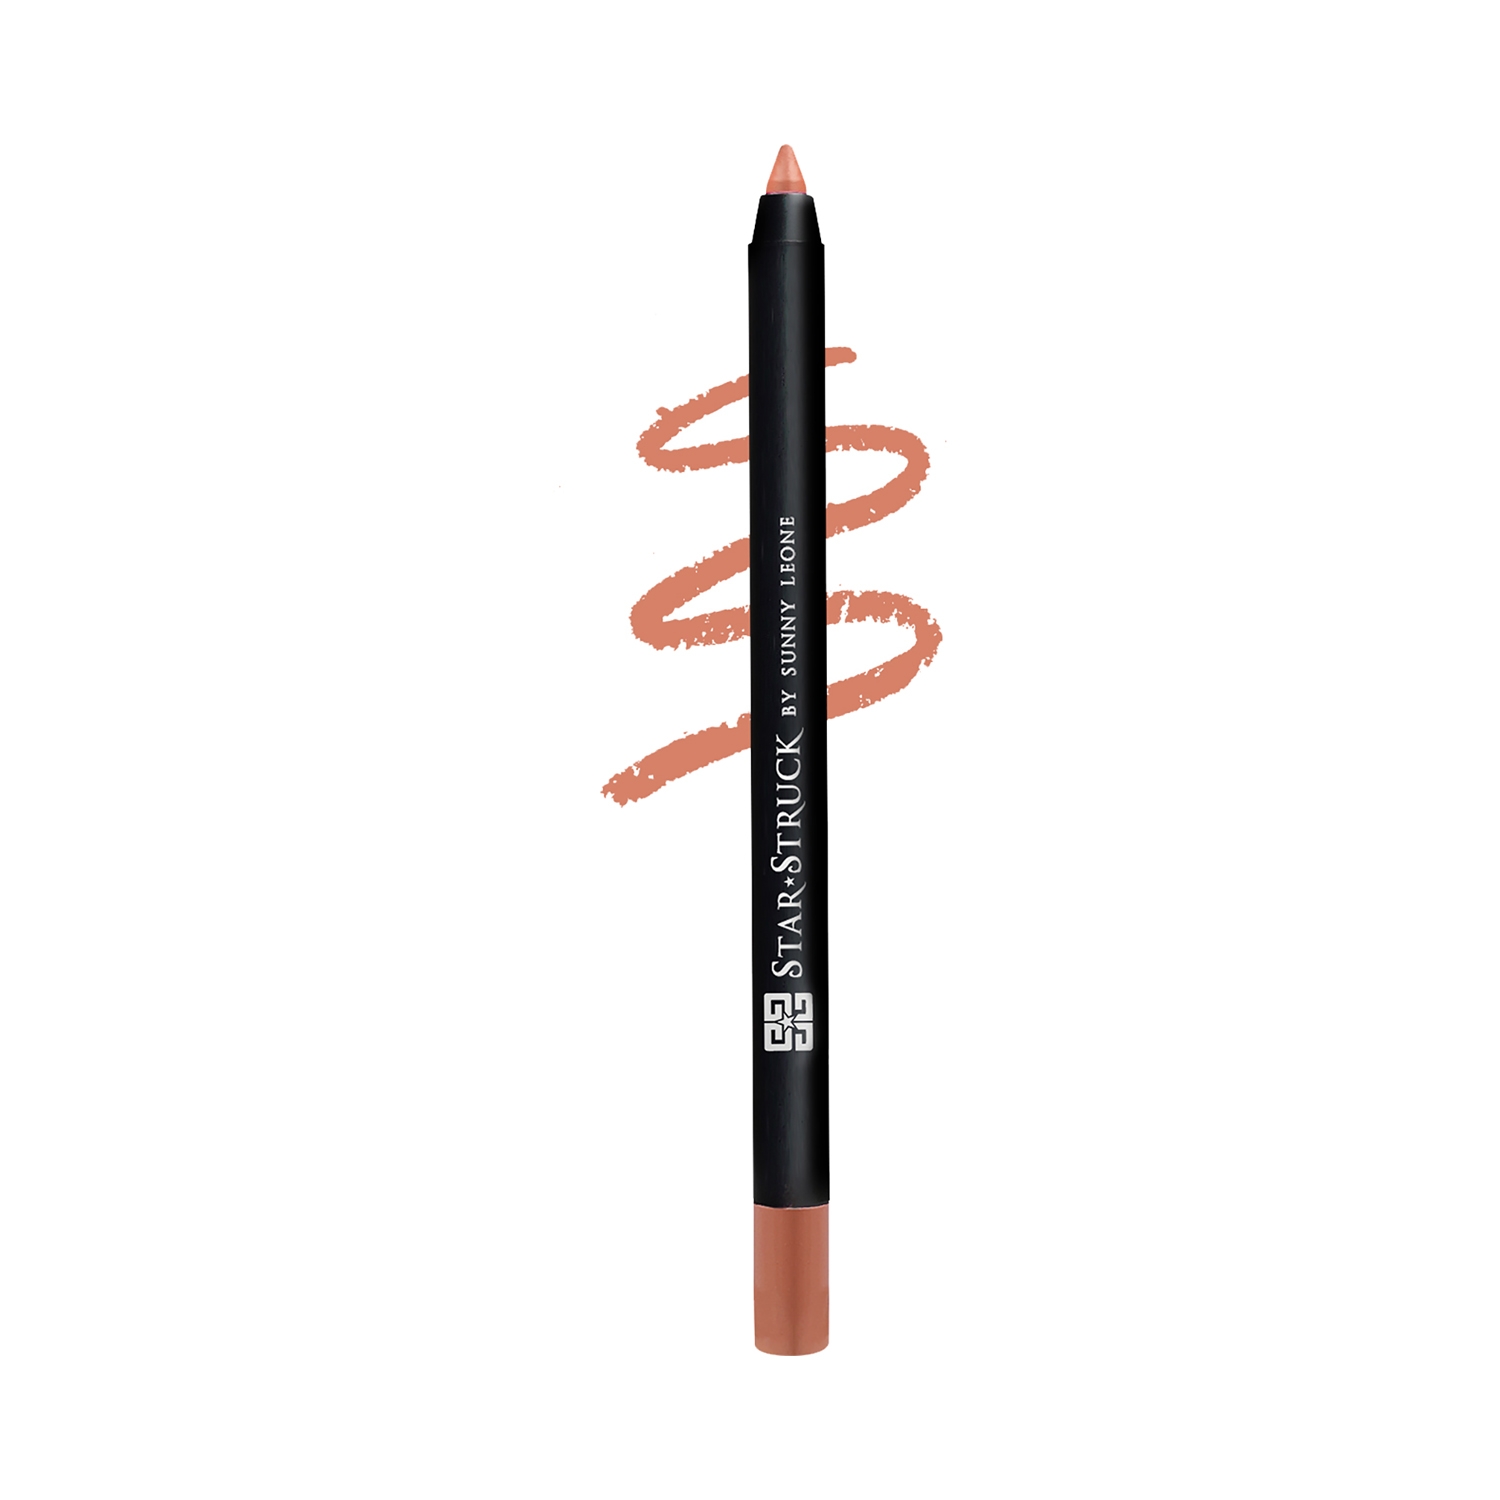 Star Struck by Sunny Leone | Star Struck by Sunny Leone Long Wear Lip Liner - Toffee (1.2g)